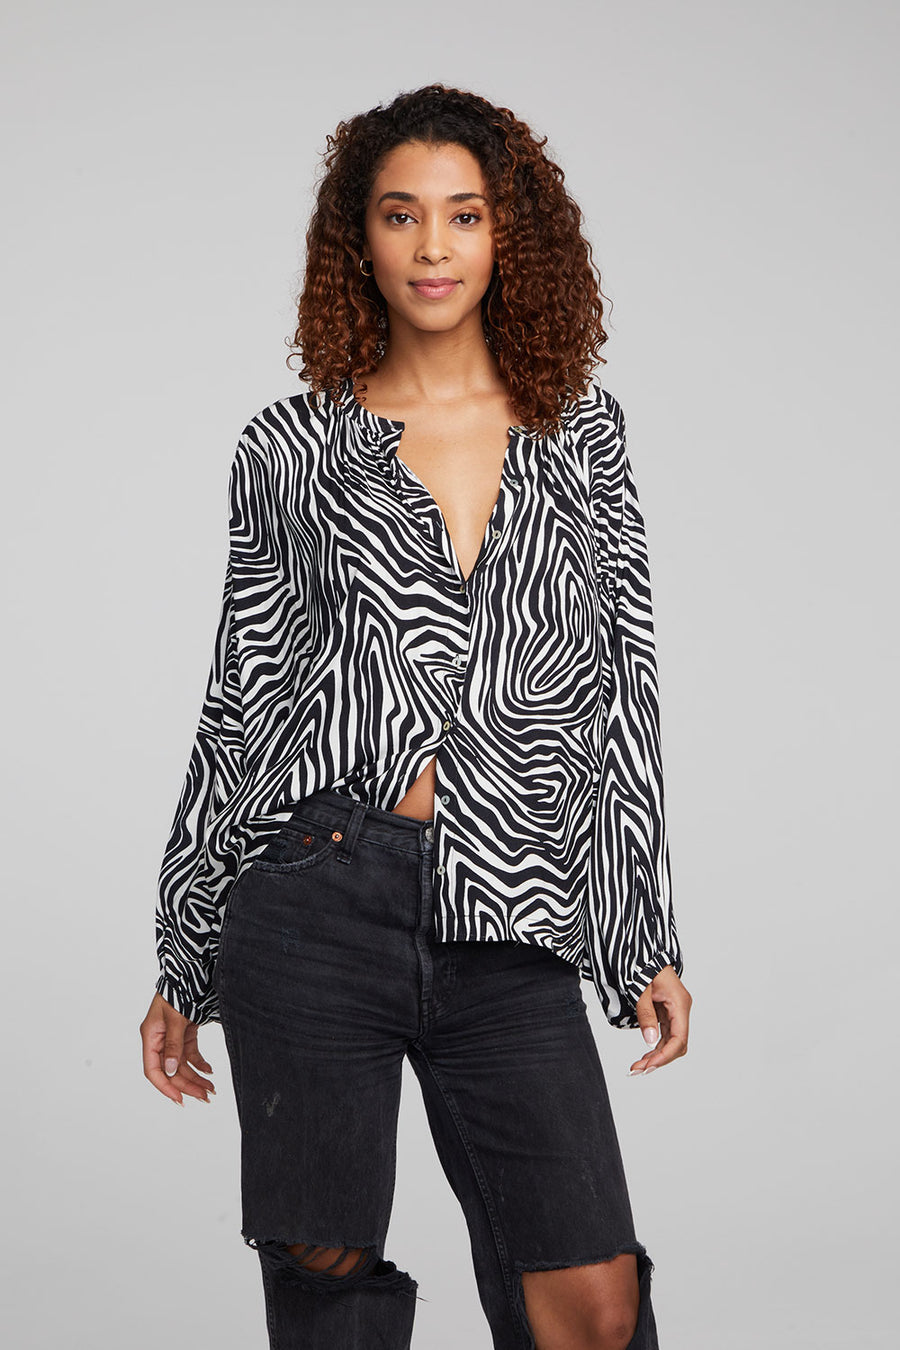 Idol "Wild Thing" Blouse WOMENS chaserbrand